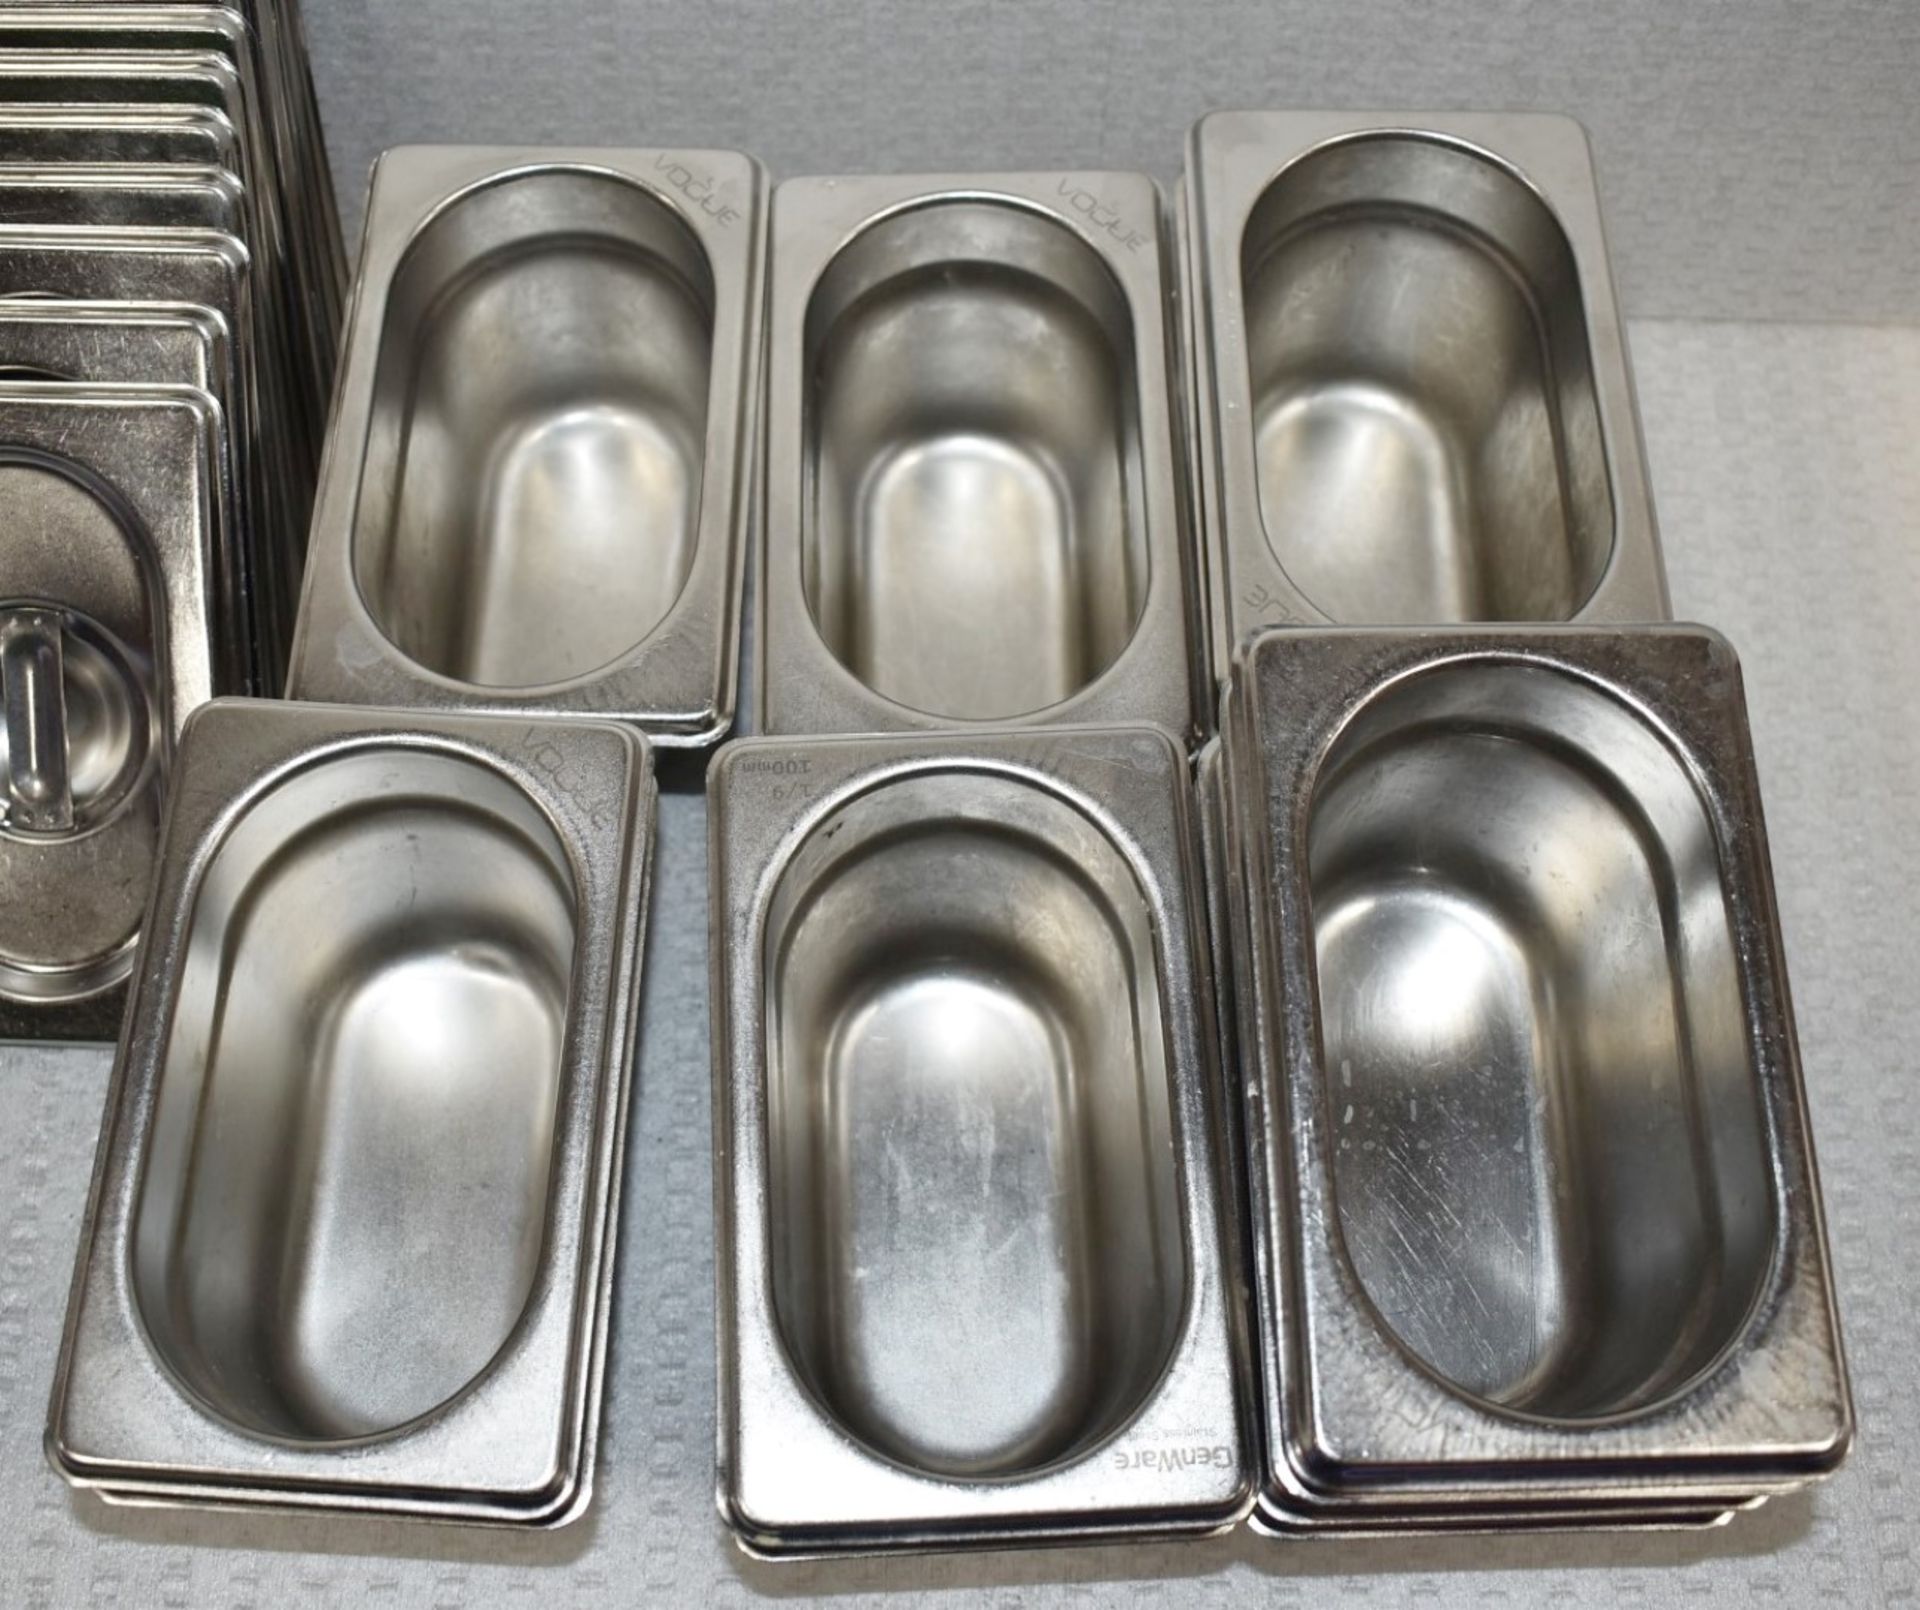 12 x Vogue Stainless Steel 1/9 Gastronorm Pans With Lids - Size: H10 x W11 x L17.5 cms - Recently - Image 2 of 3